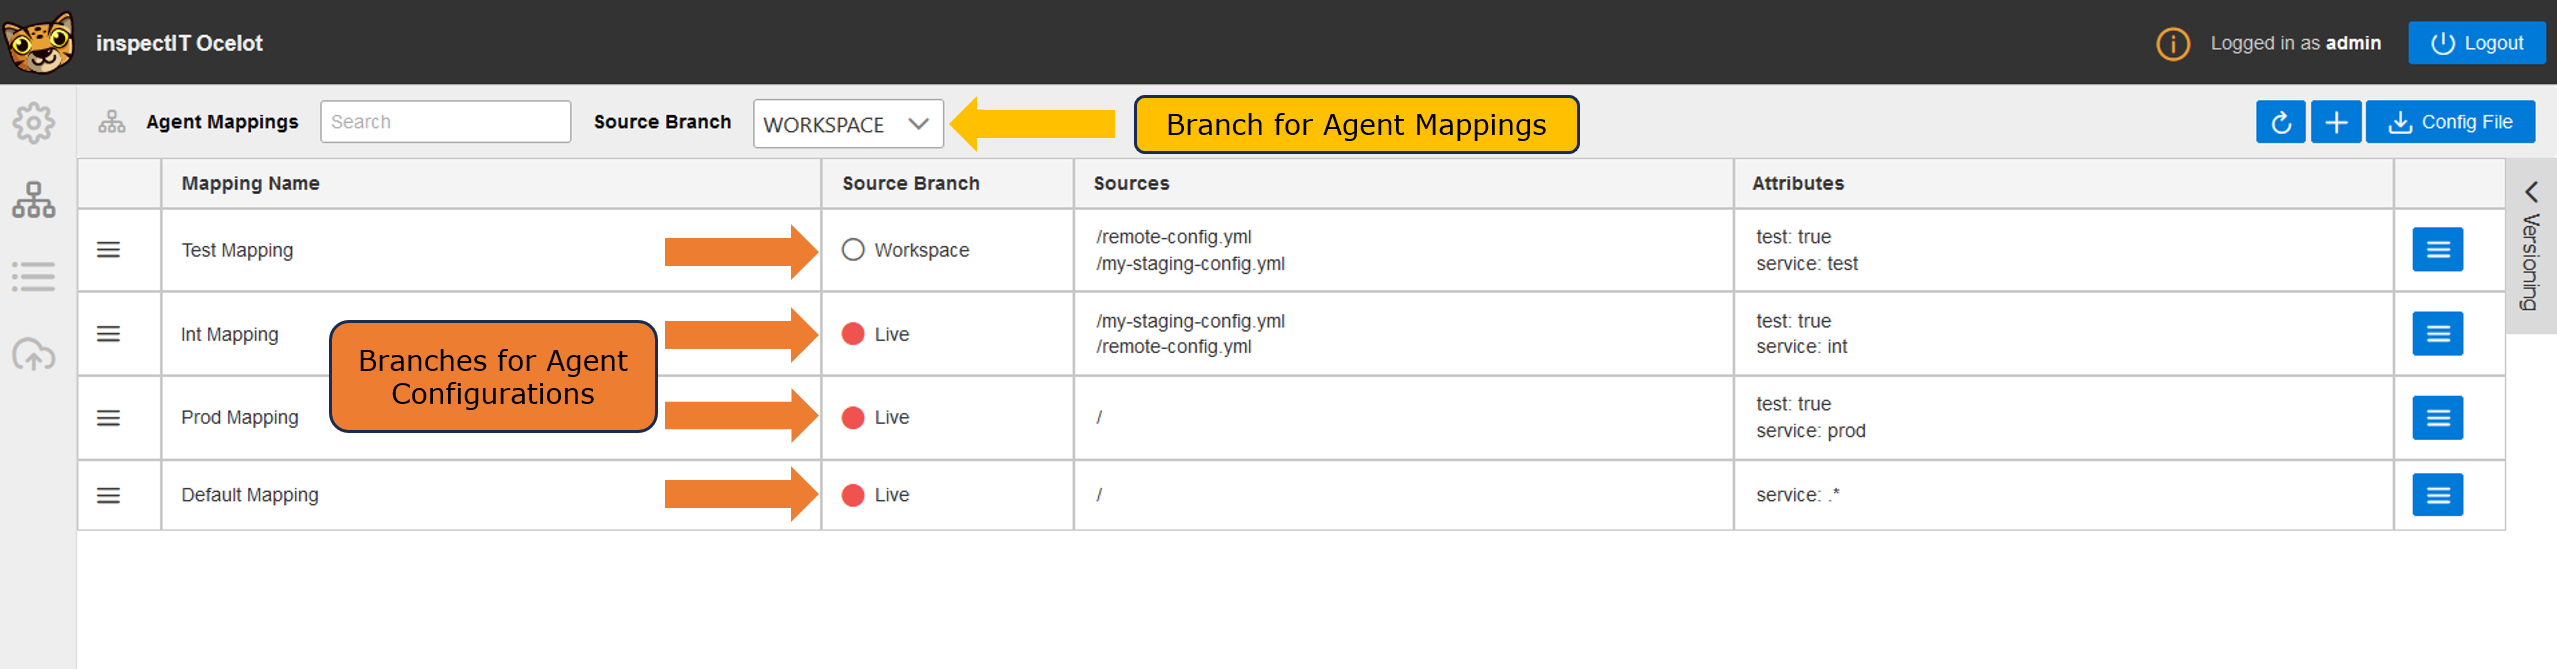 Different Source Branches on Agent Mappings Page